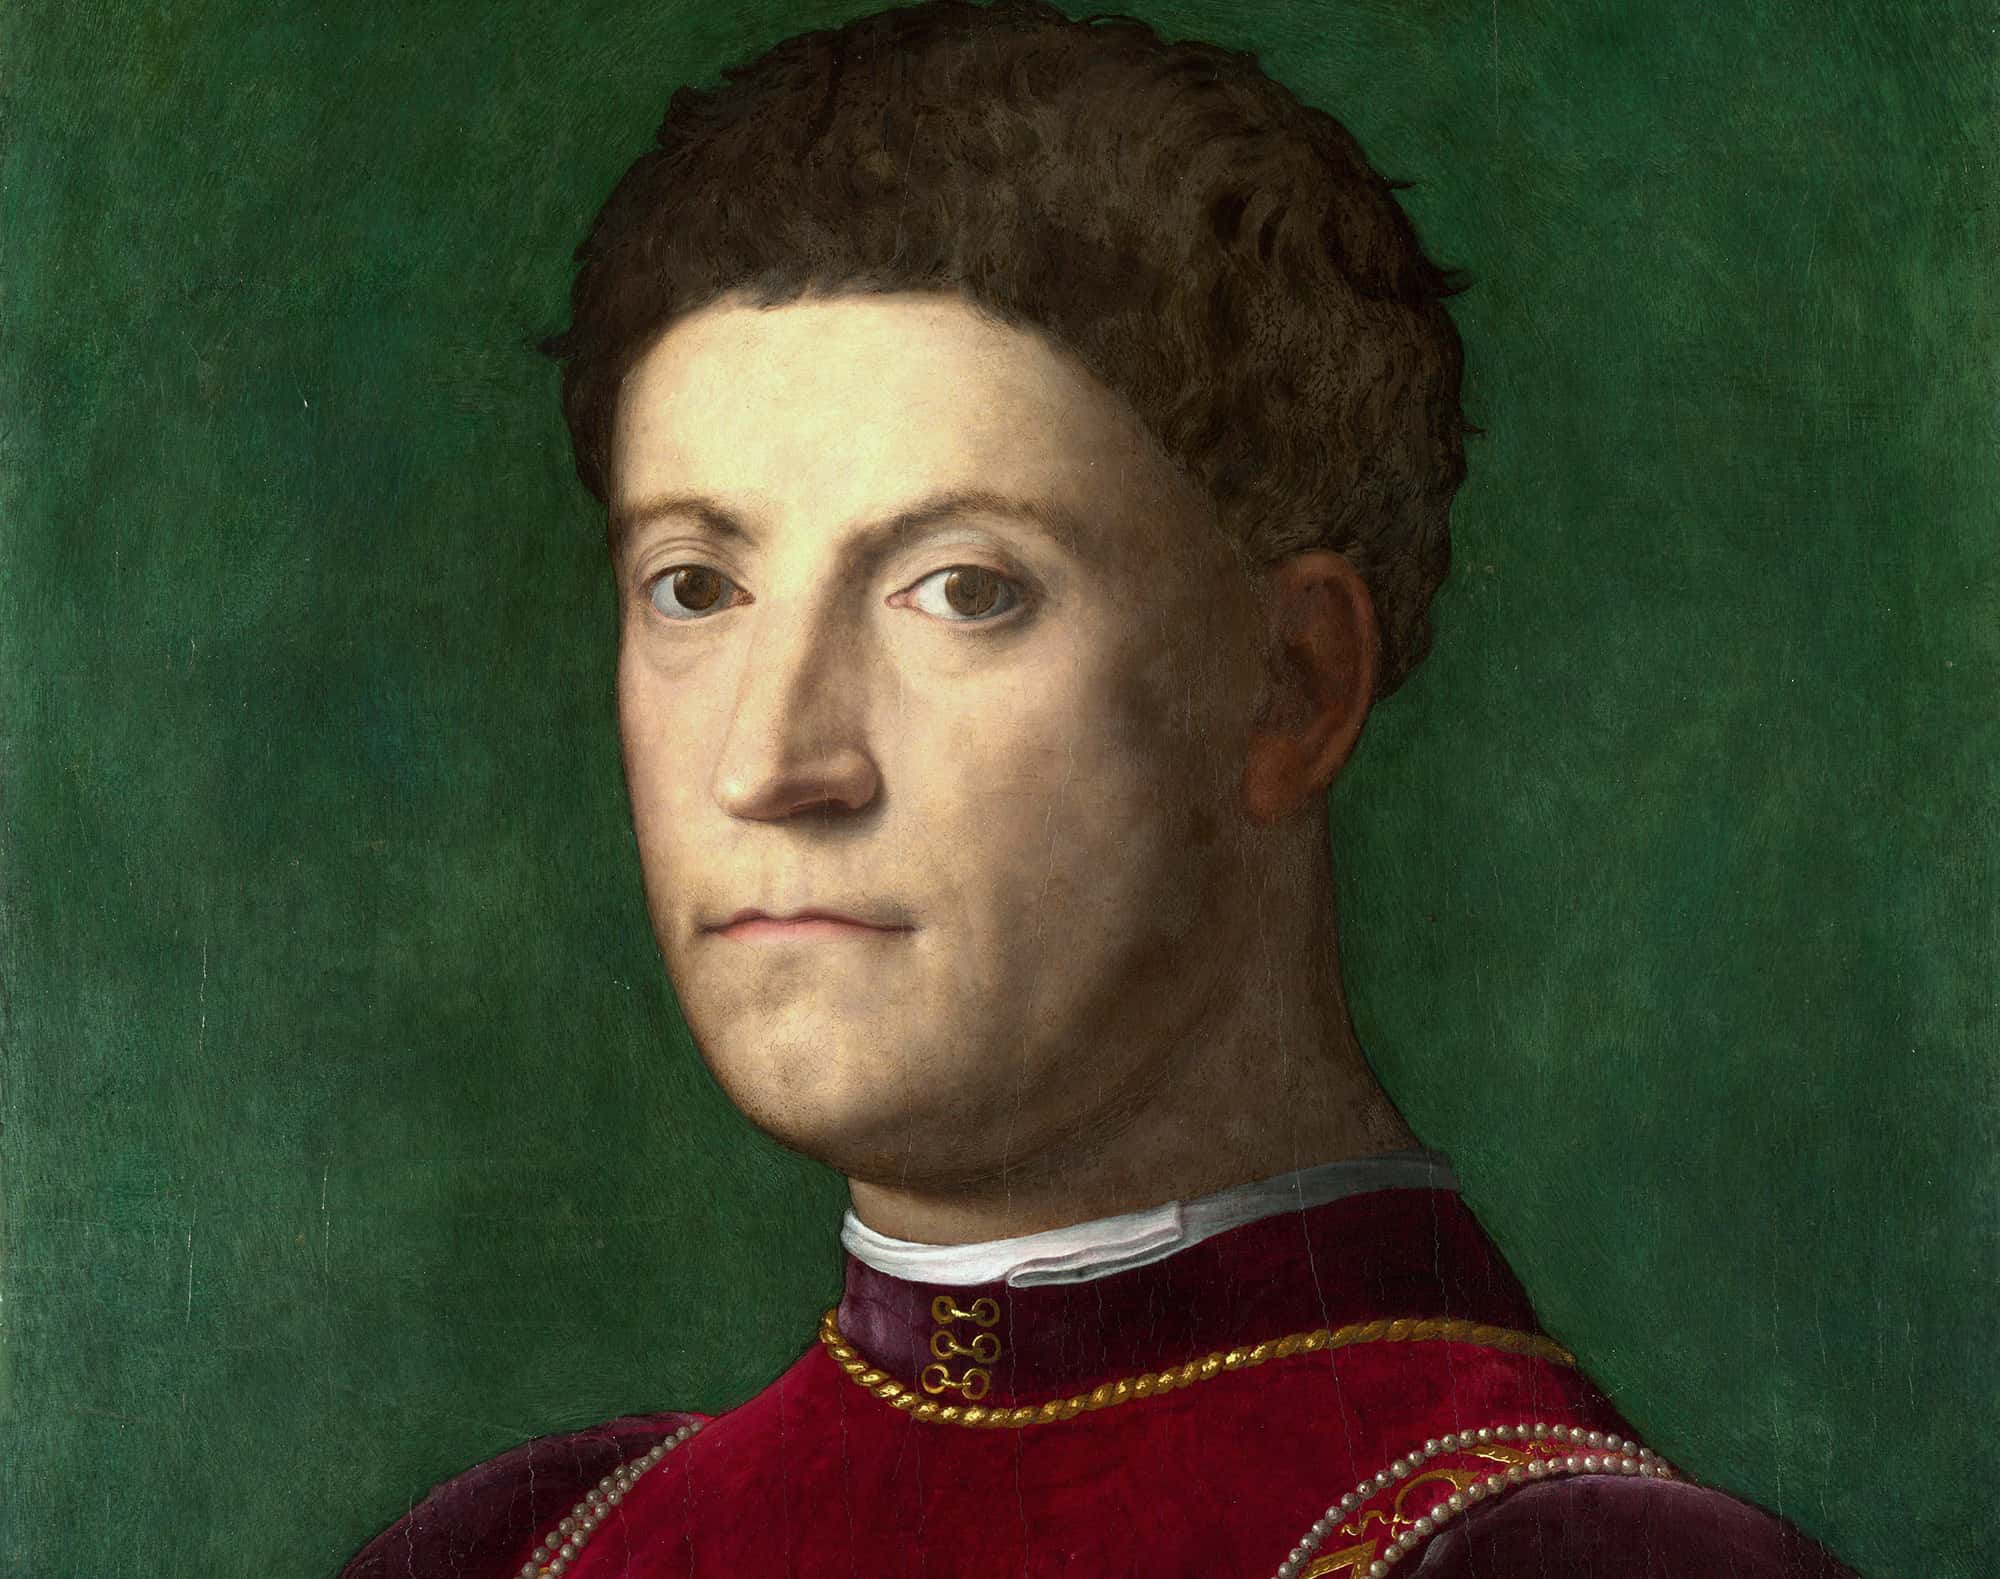 Medici Dynasty facts